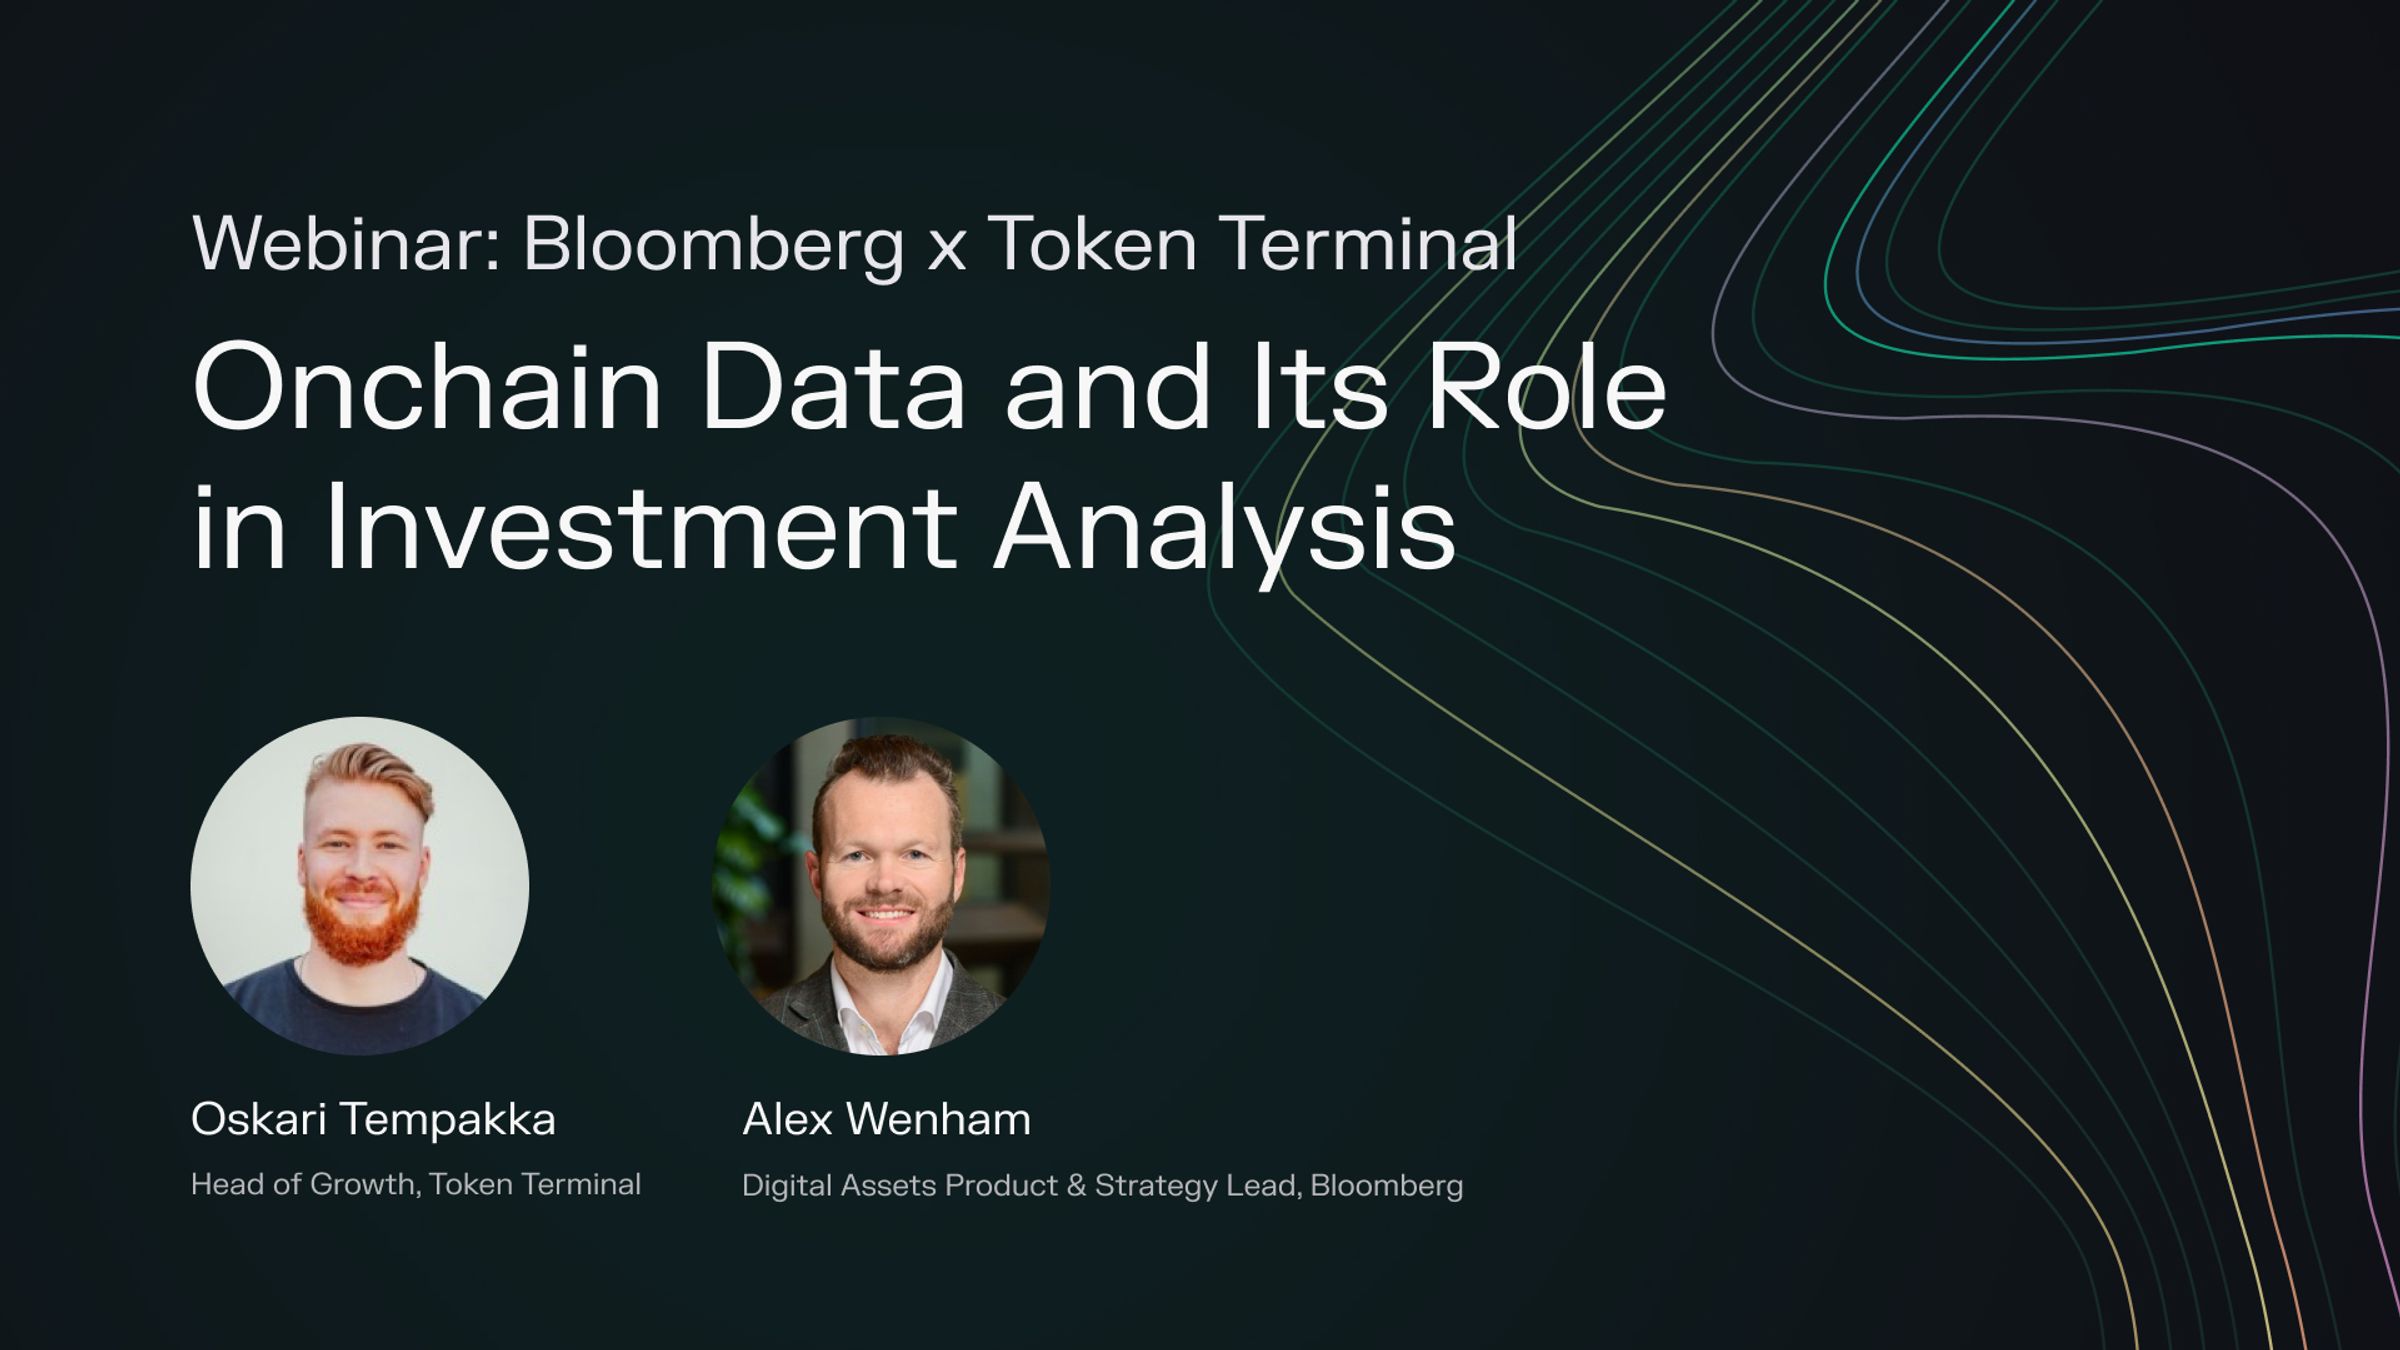 Bloomberg x Token Terminal: Onchain Data and Its Role in Investment Analysis